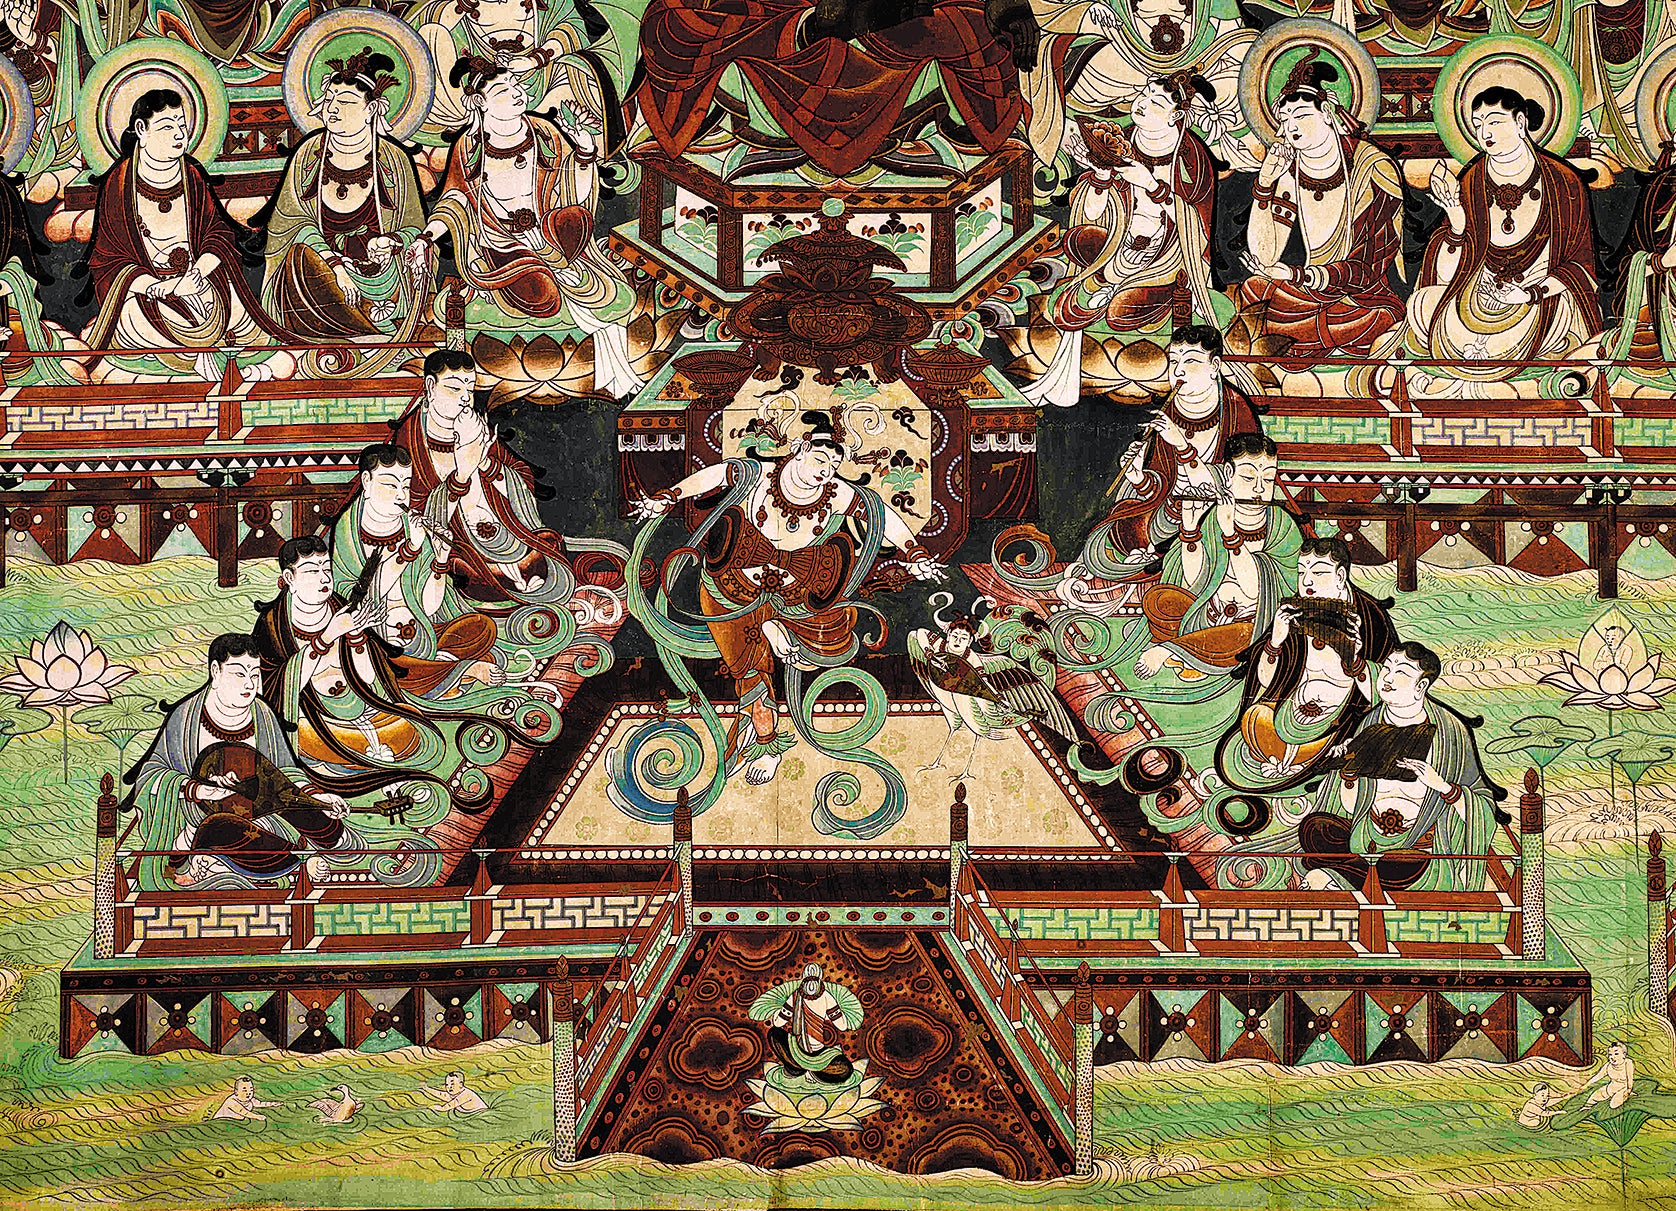 A scene from a mural in Gansu province depicting a band of musicians